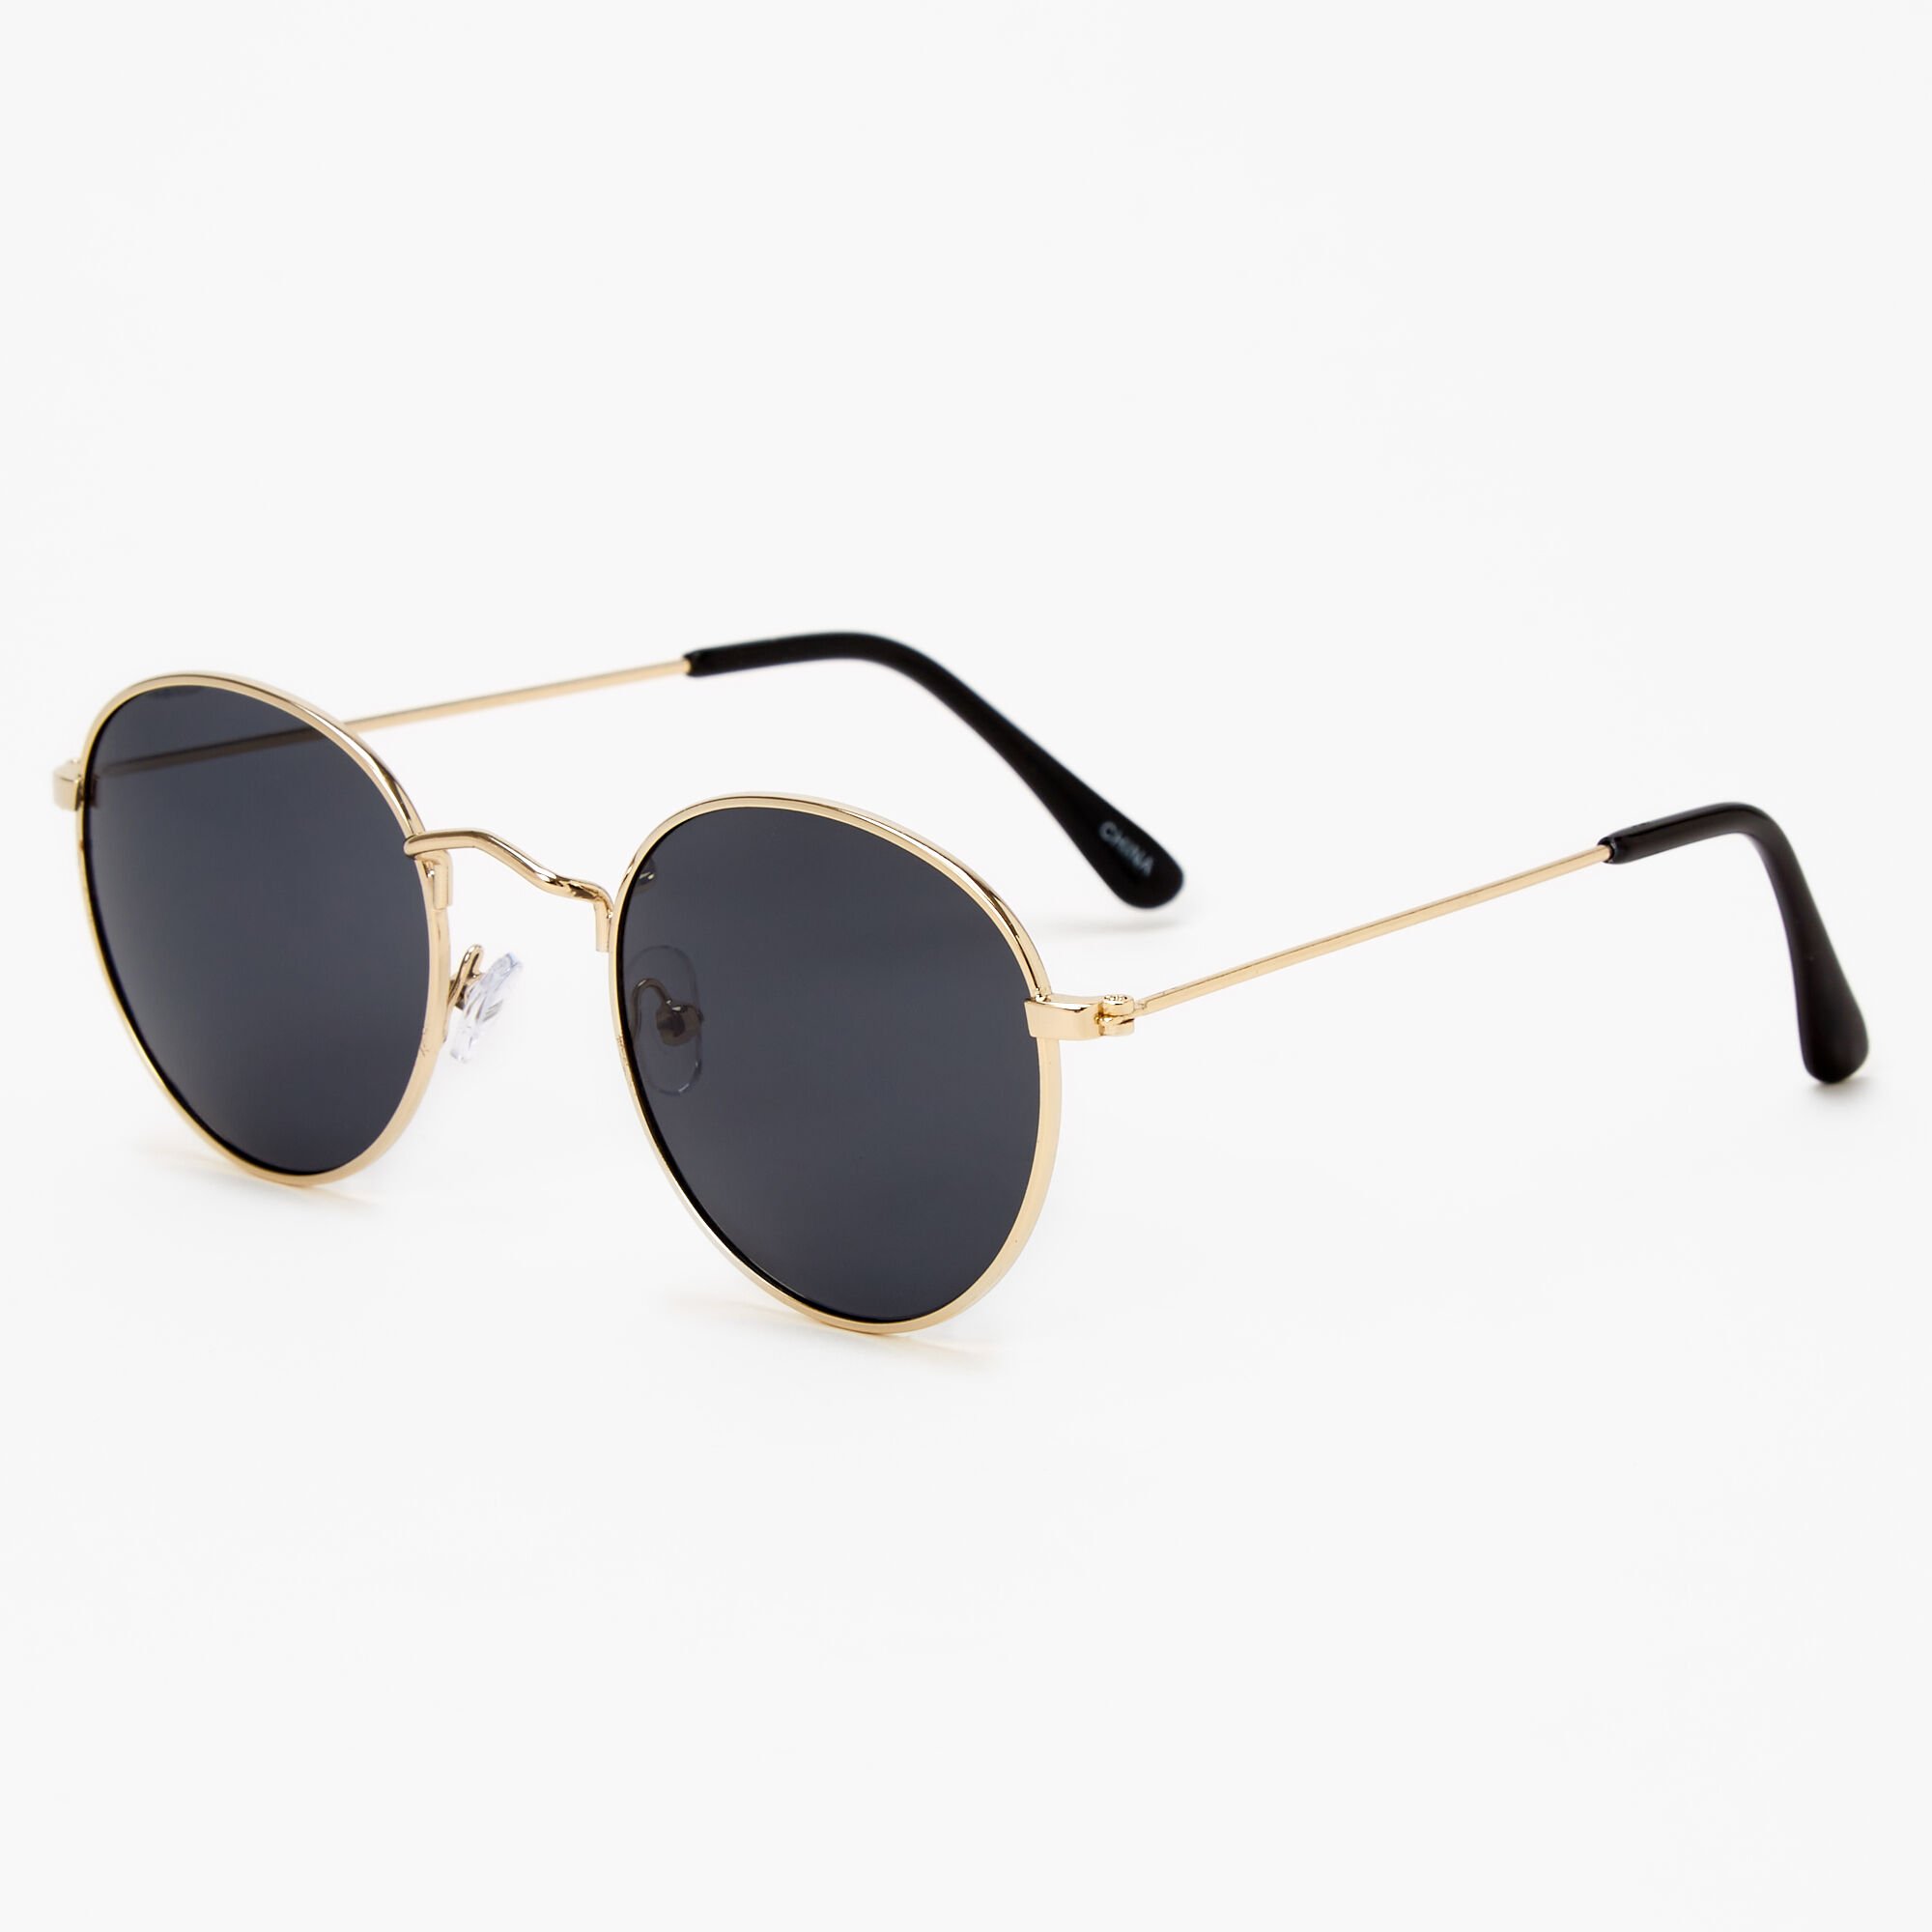 View Claires Gold Round Sunglasses Black information